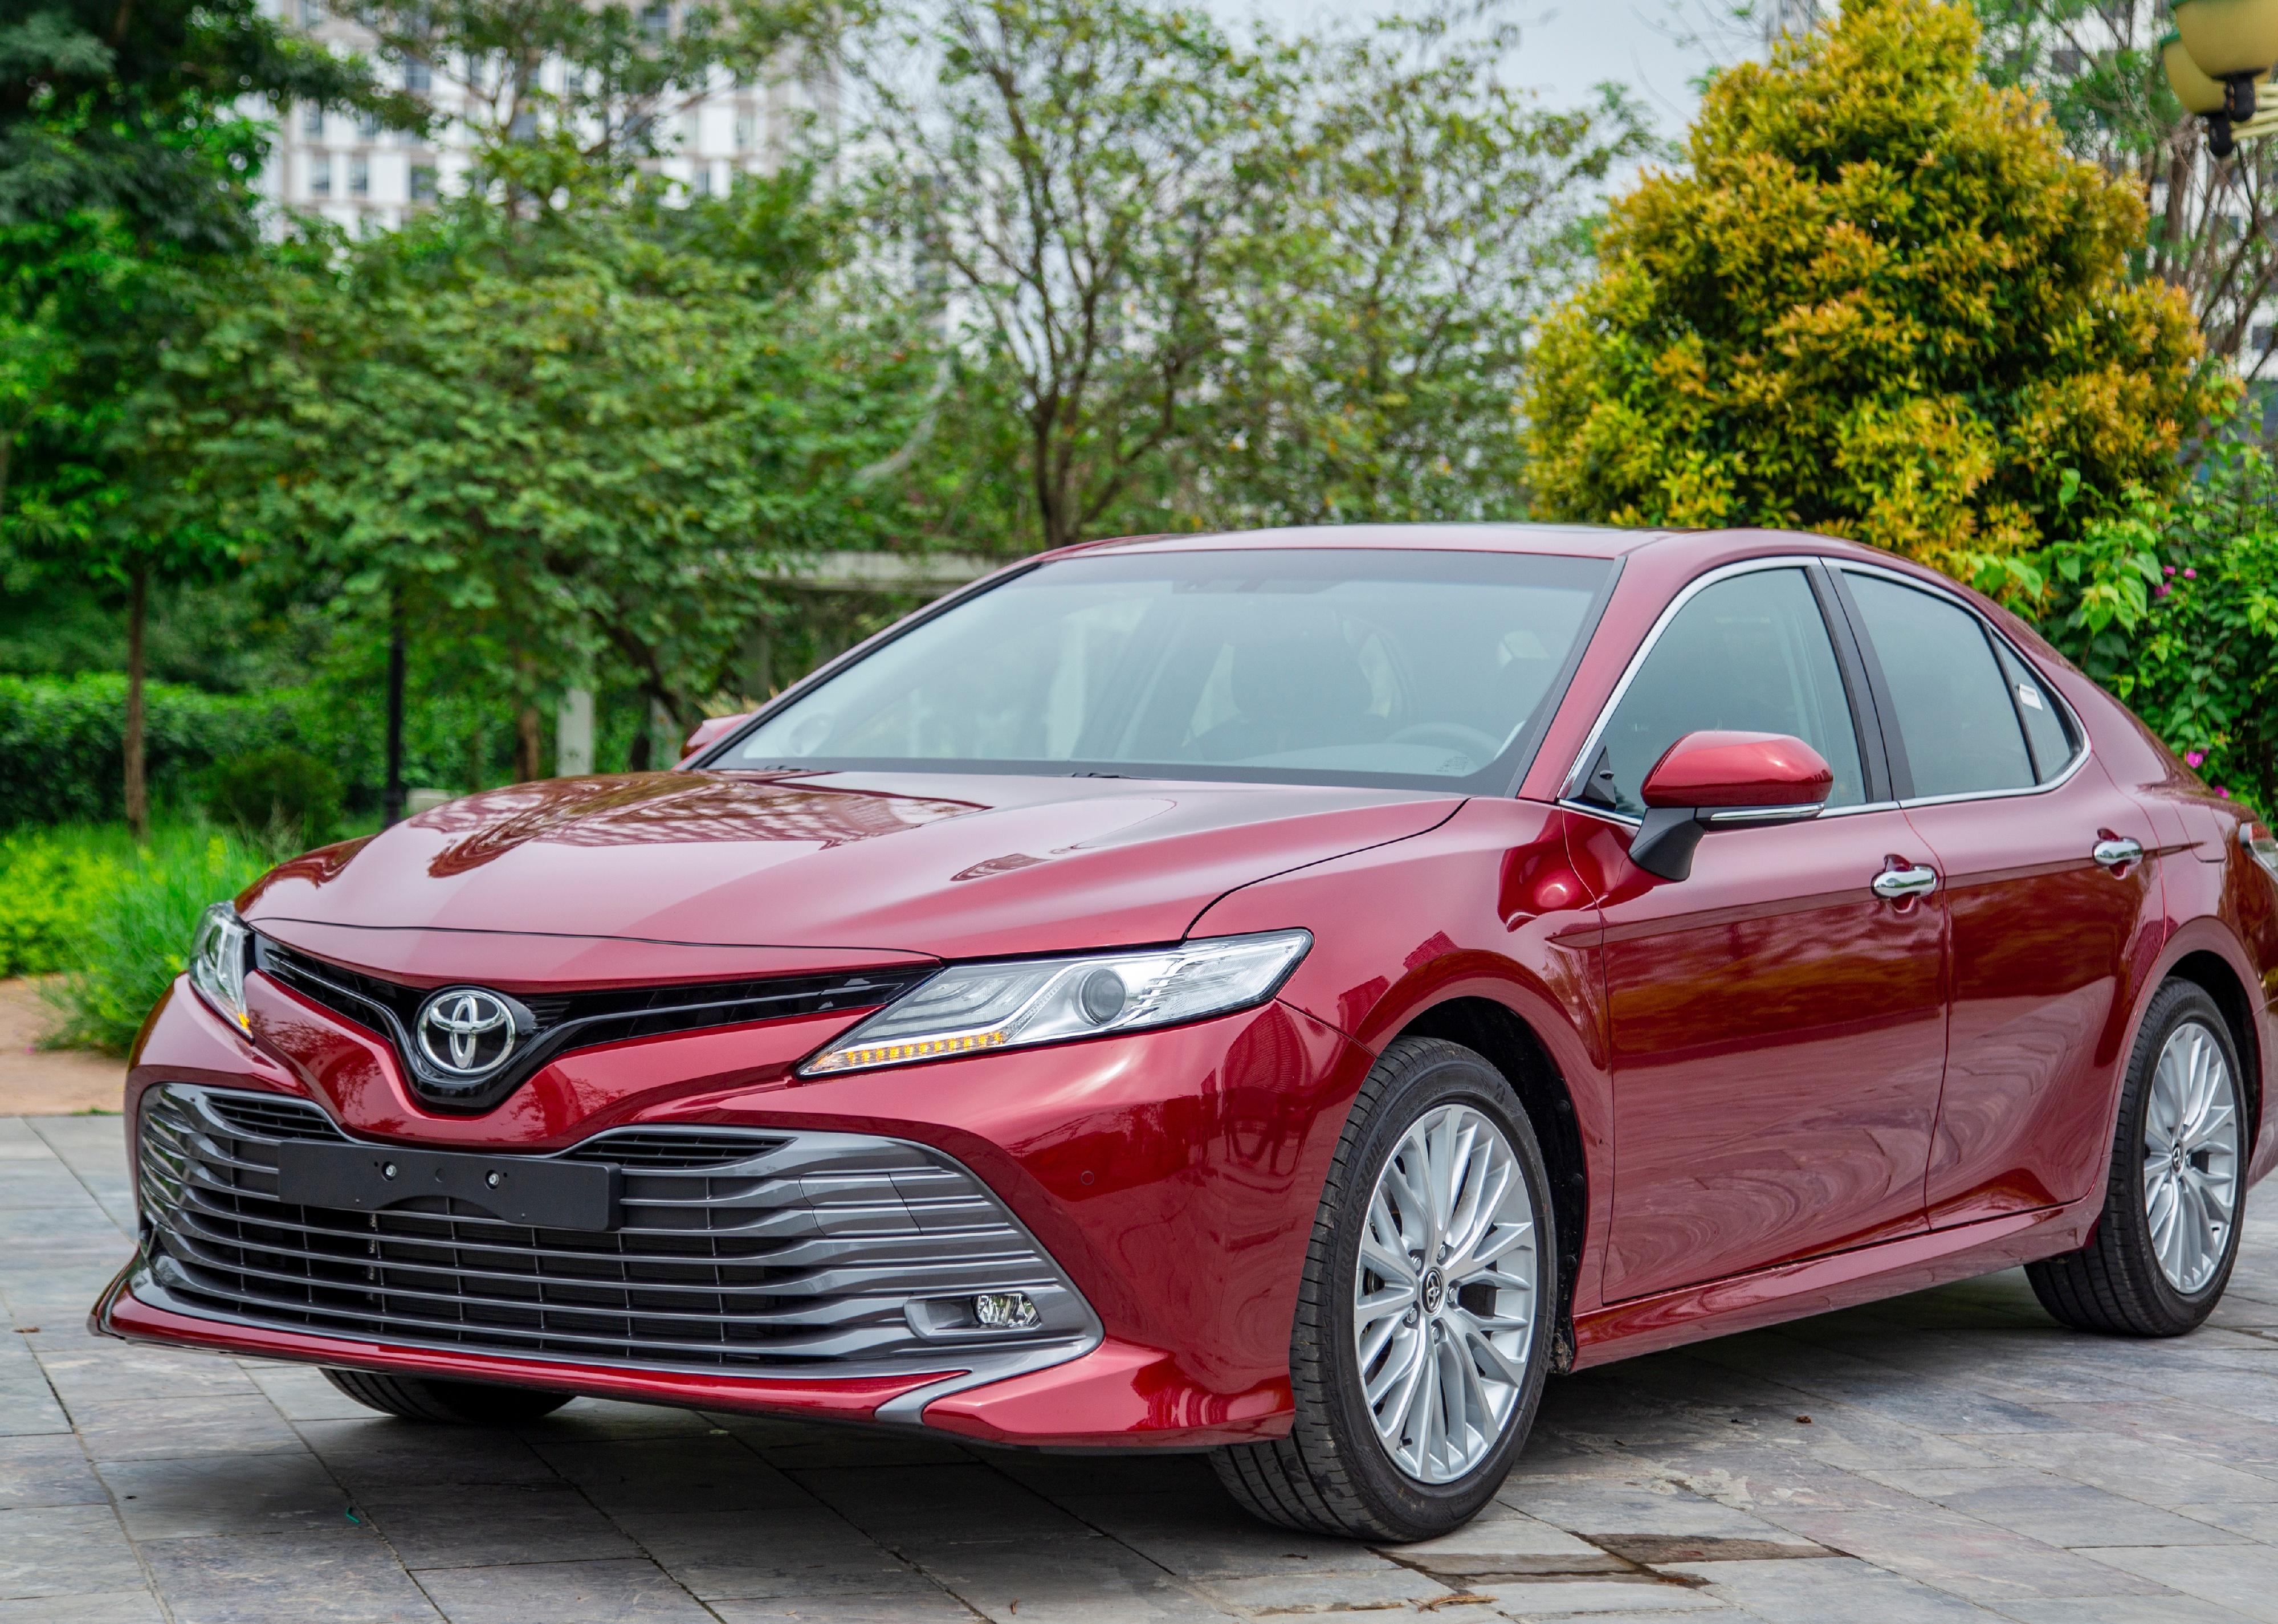 Front view of a red Toyota Camry 2019.